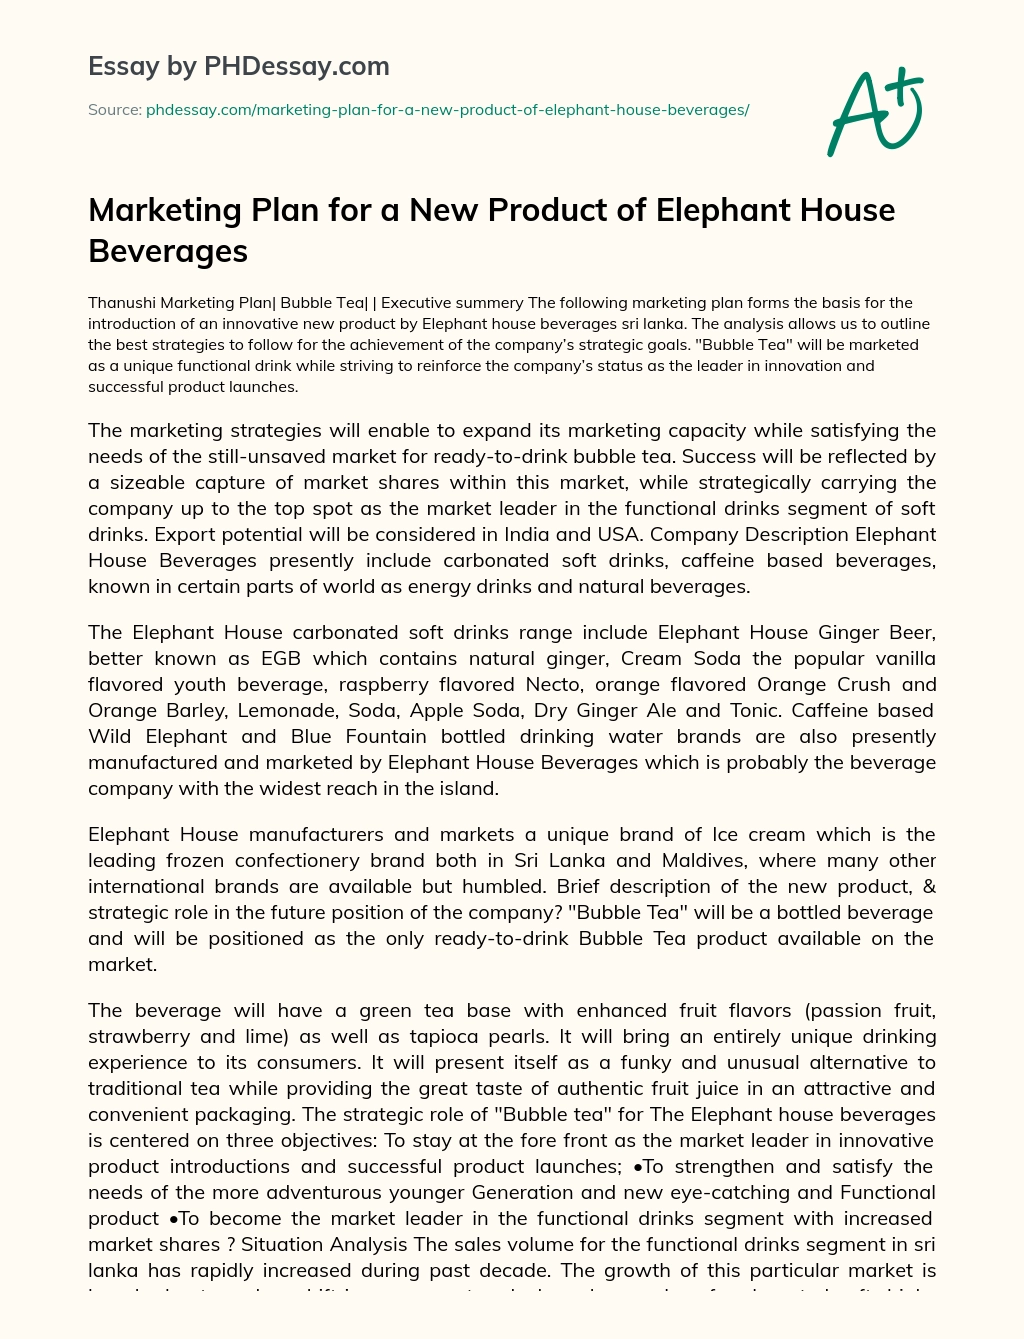 Marketing Plan for a New Product of Elephant House Beverages essay